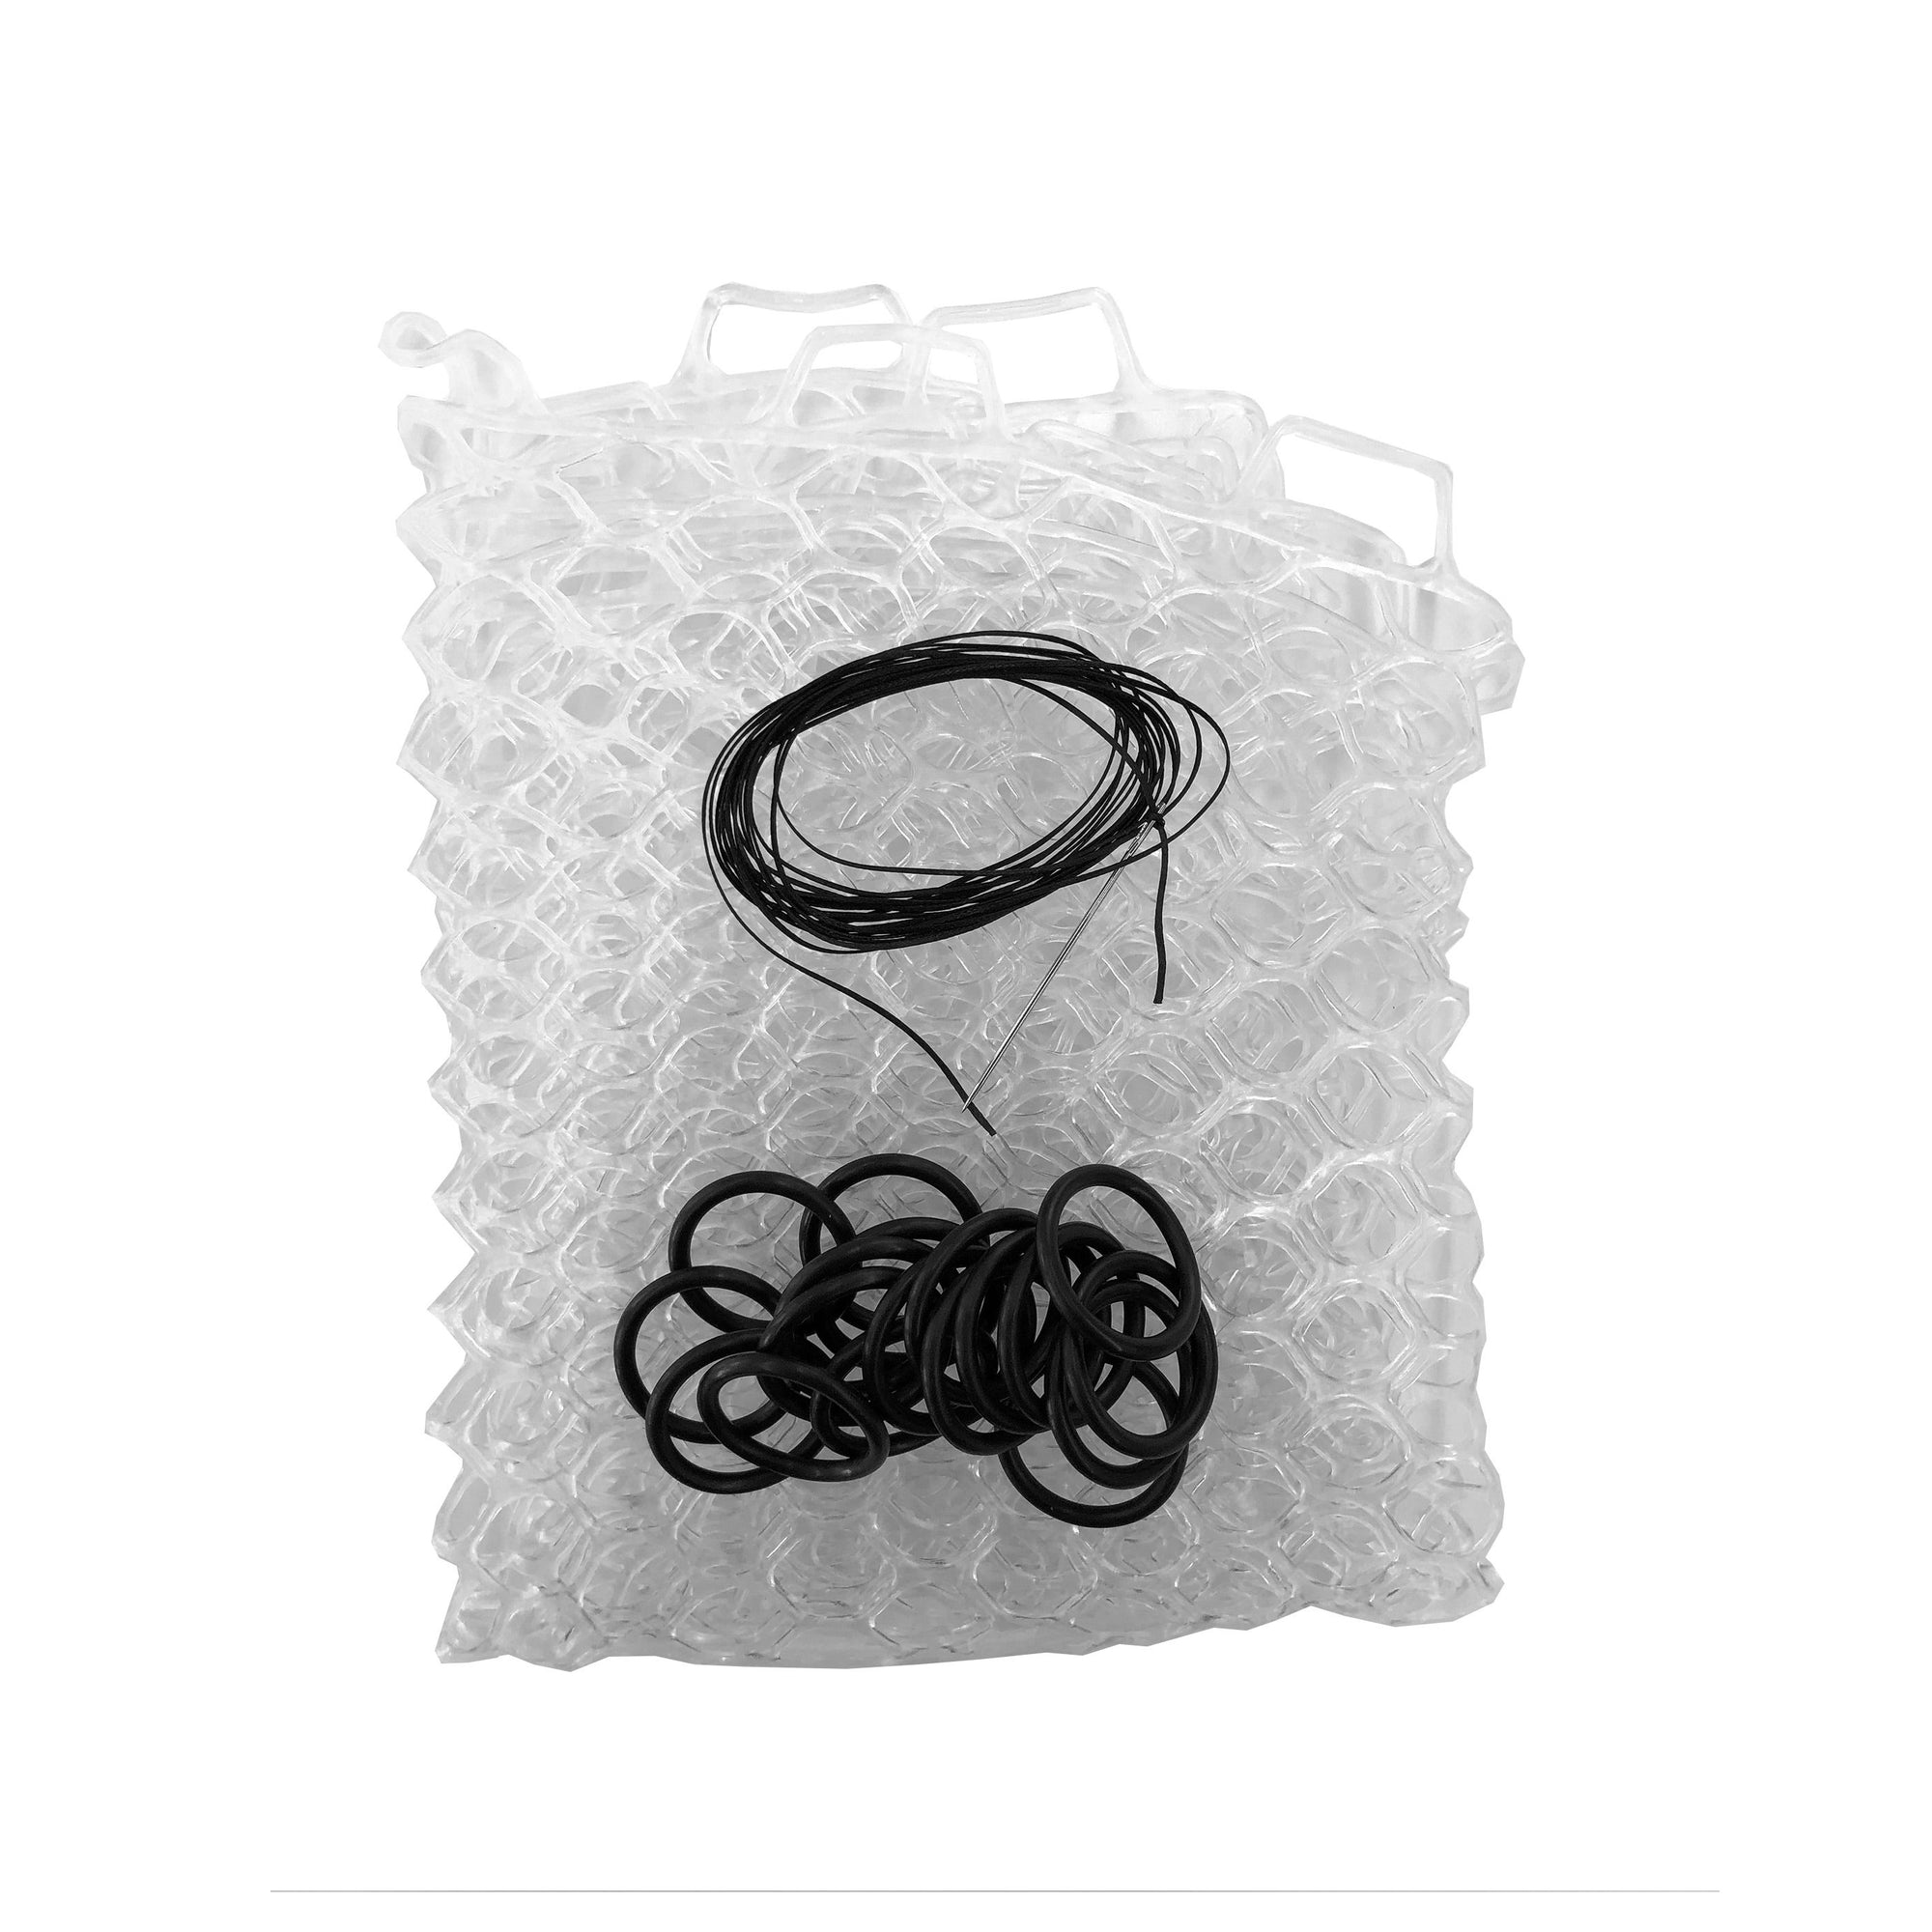 Fishpond Nomad Replacement Rubber Net 19"